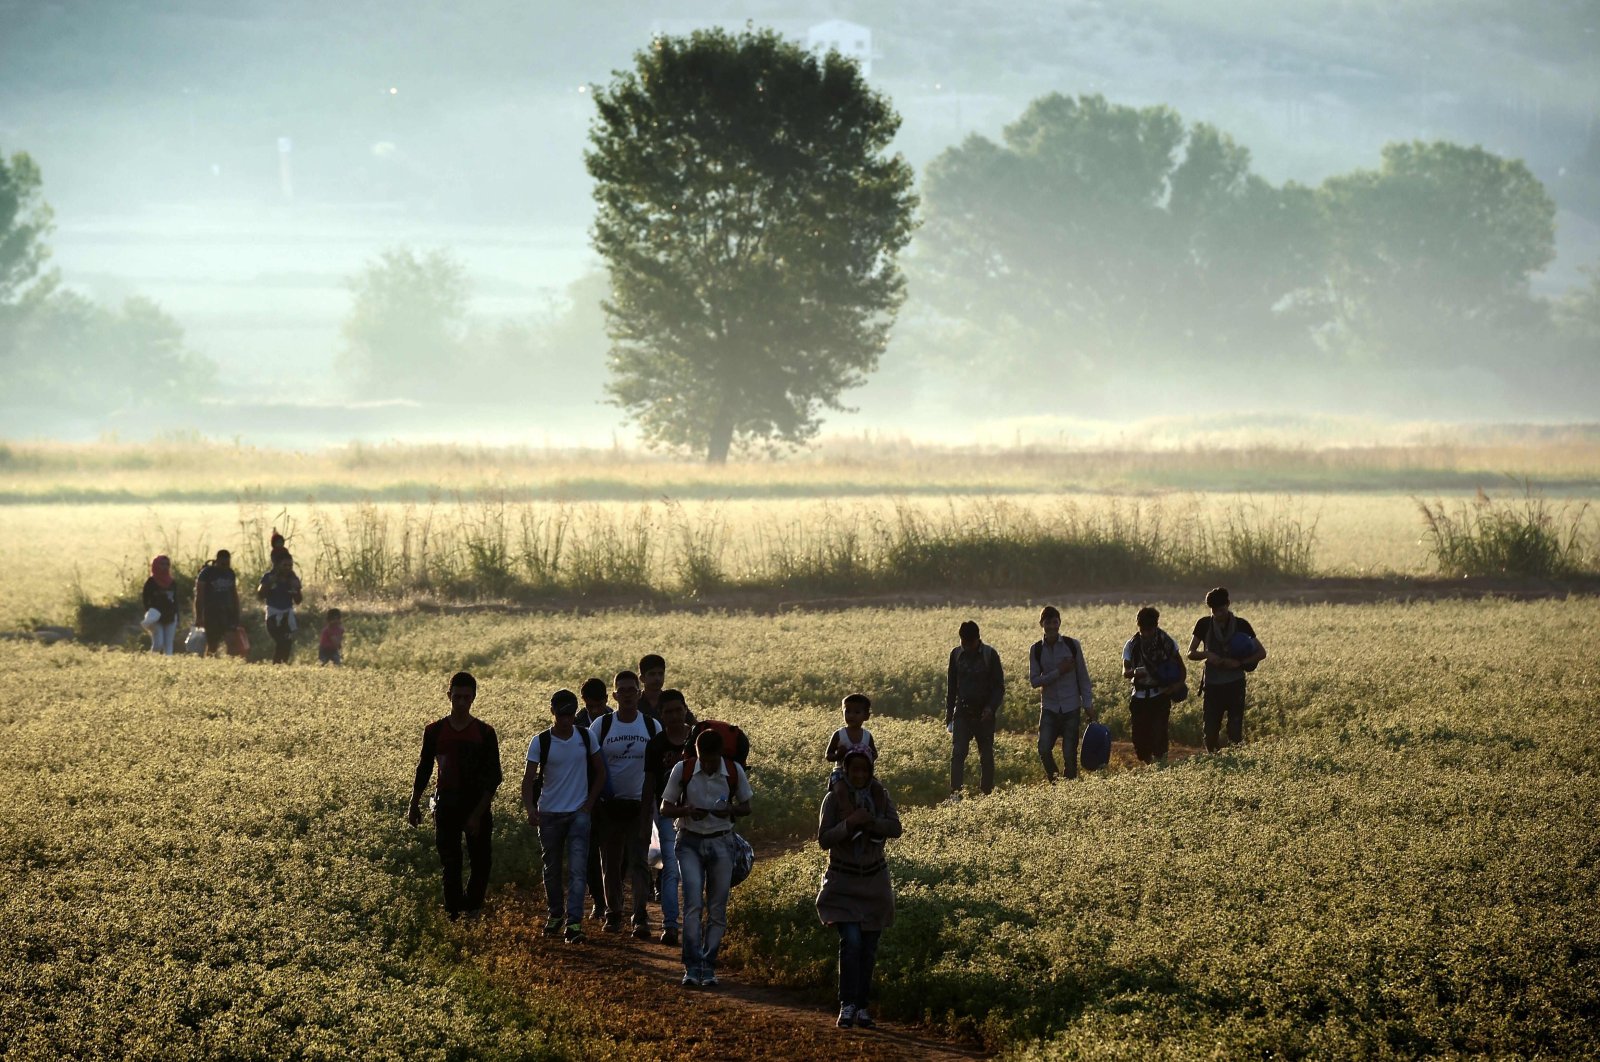 Migrants walking through a field to cross the border from Greece to Macedonia near the Greek village of Idomeni, Aug. 29, 2015. (AFP Photo)